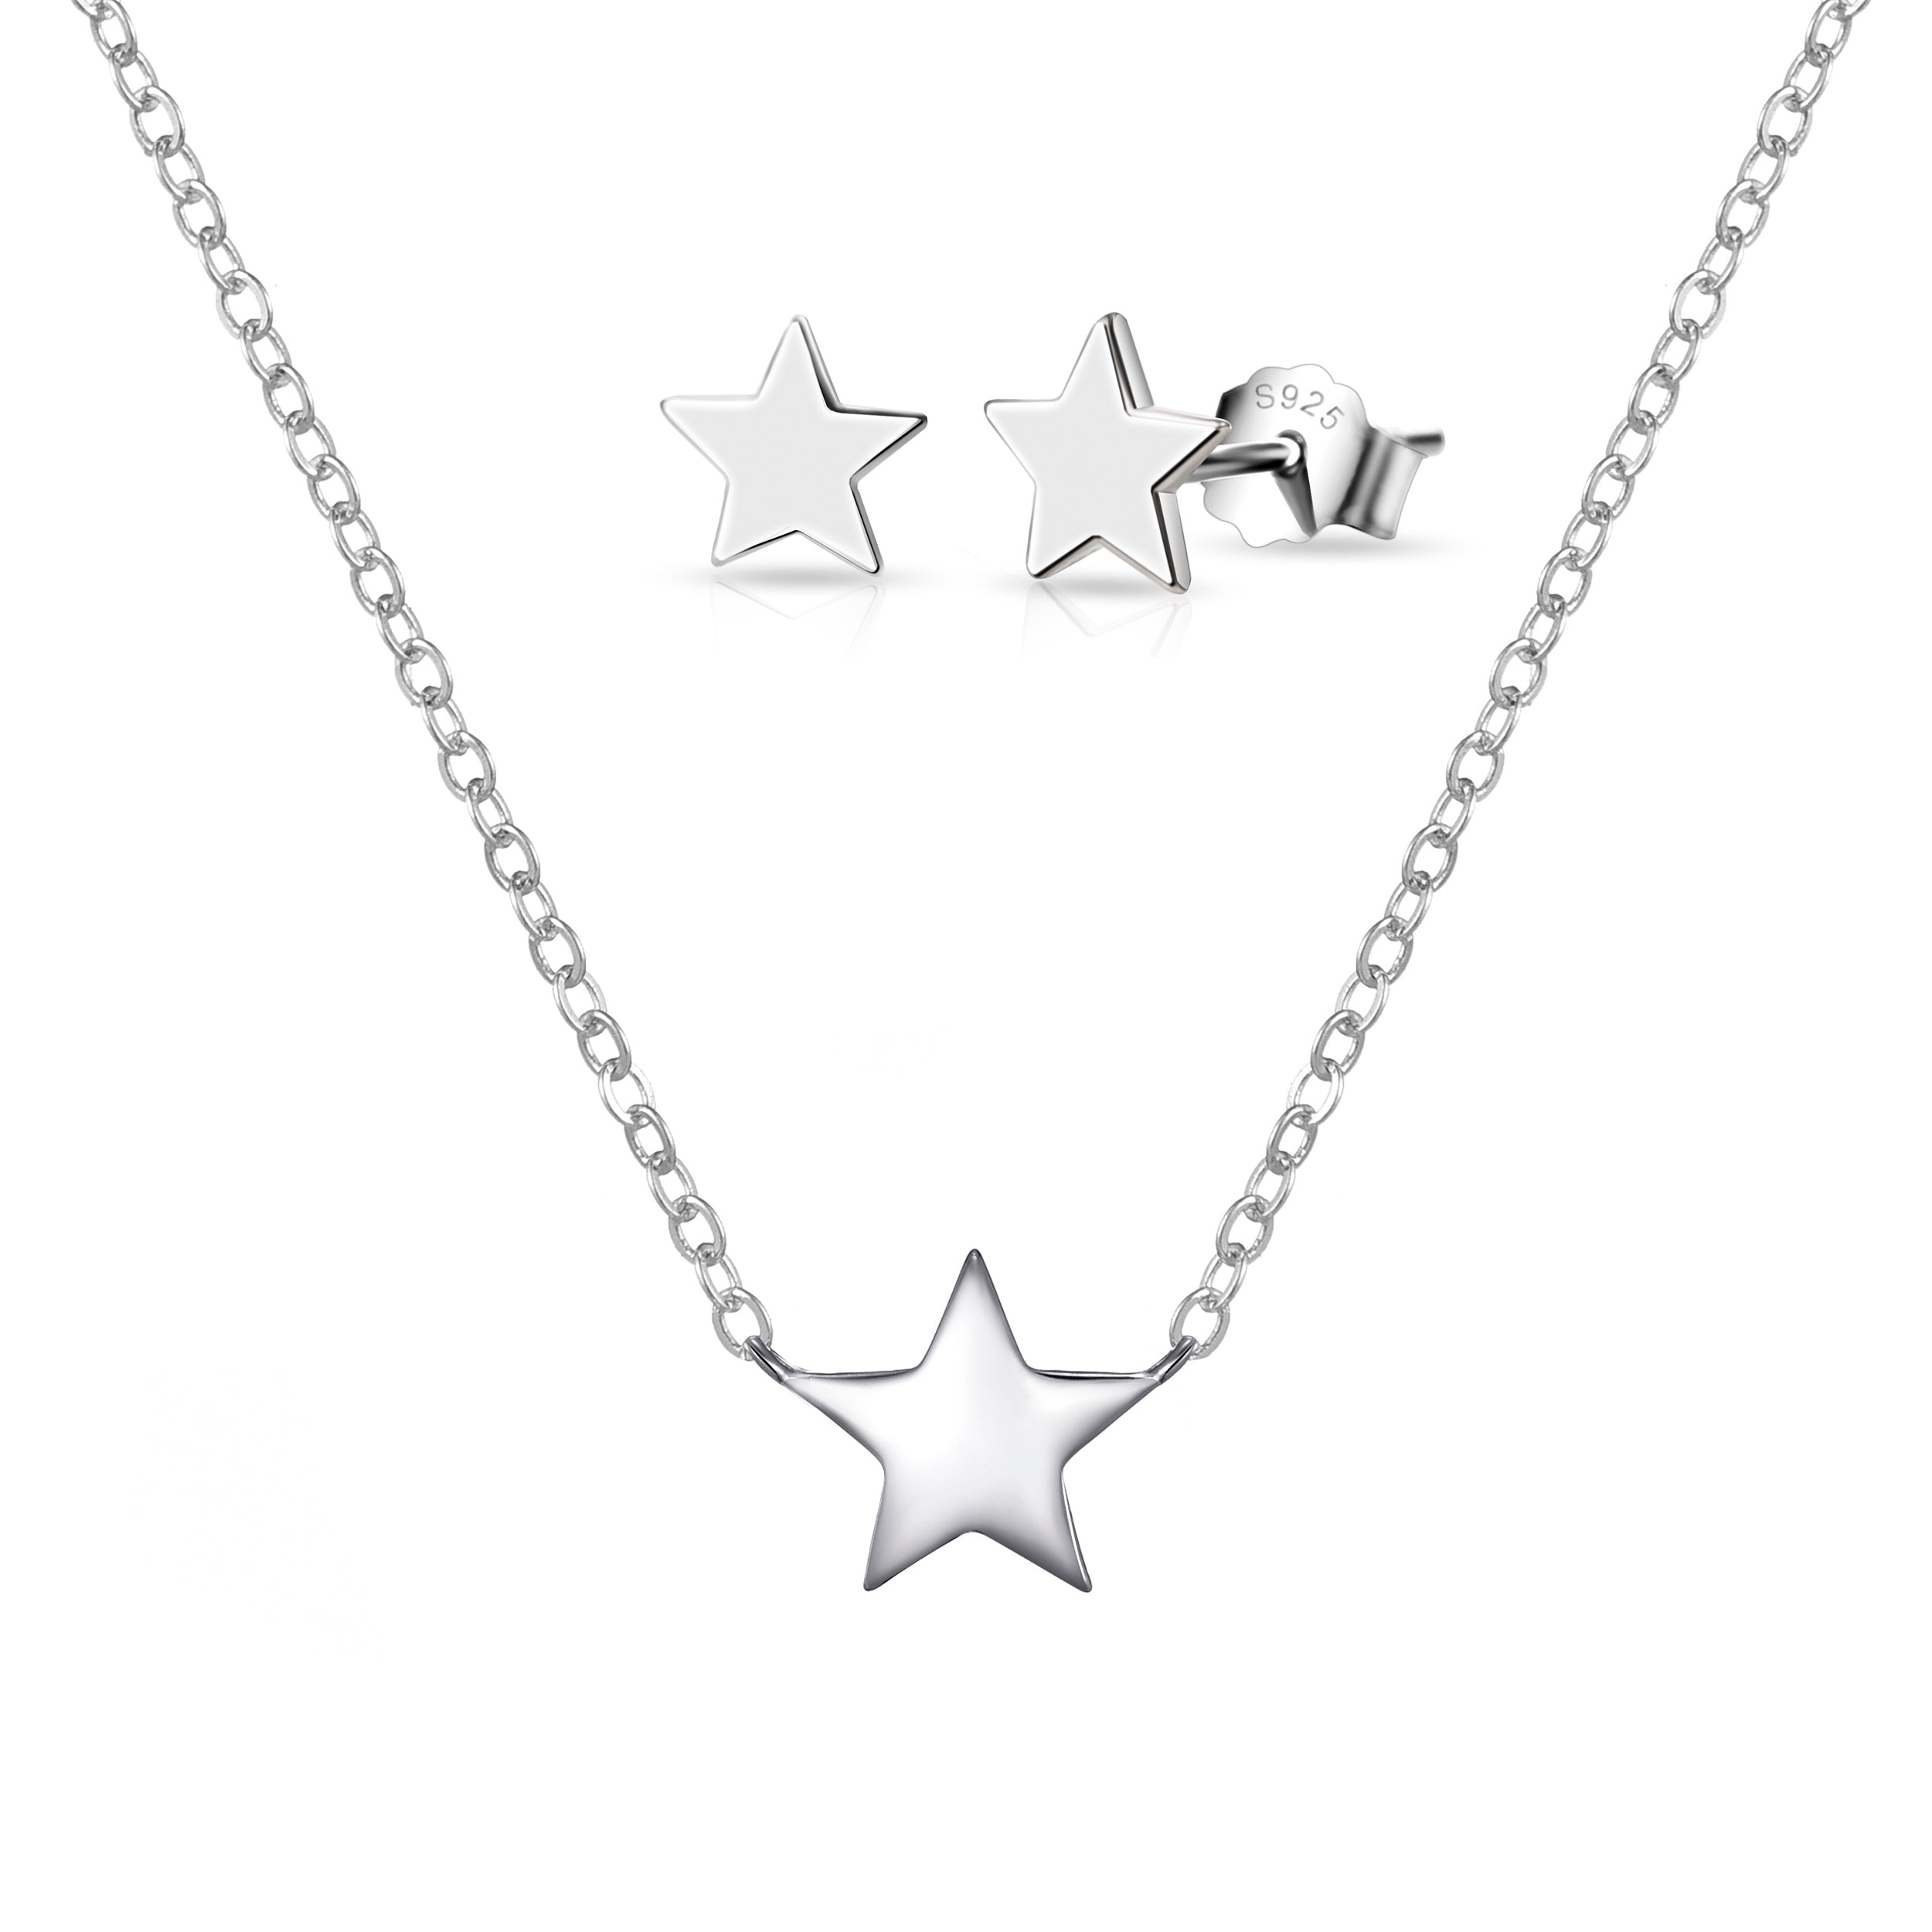 Sterling Silver Friendship Quote Star Set